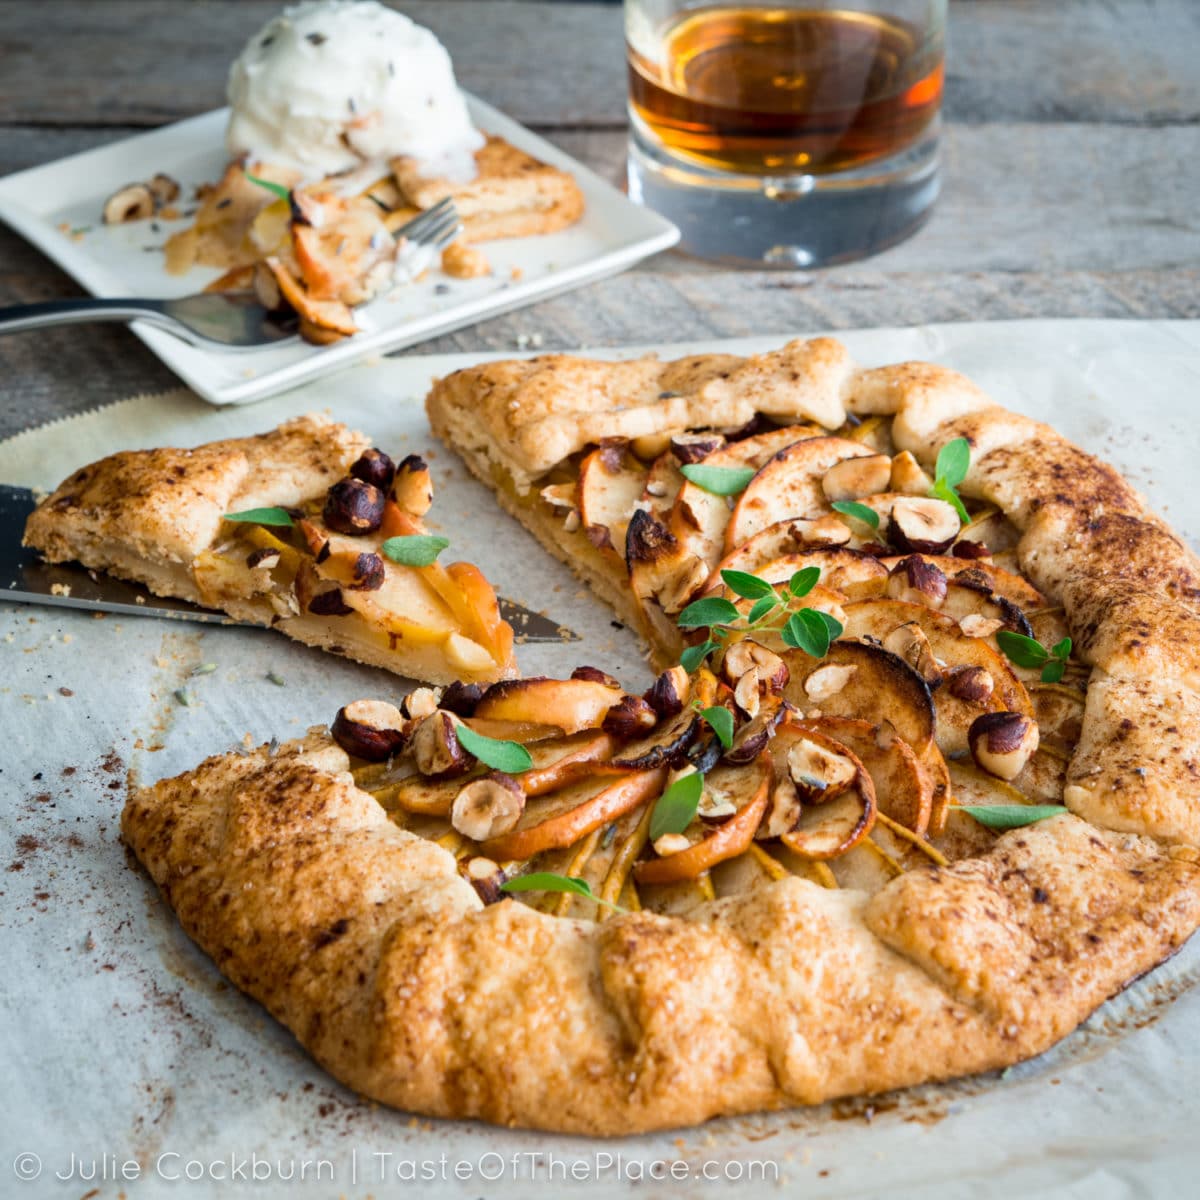 Pear and apple galette from TasteOfThePlace.com